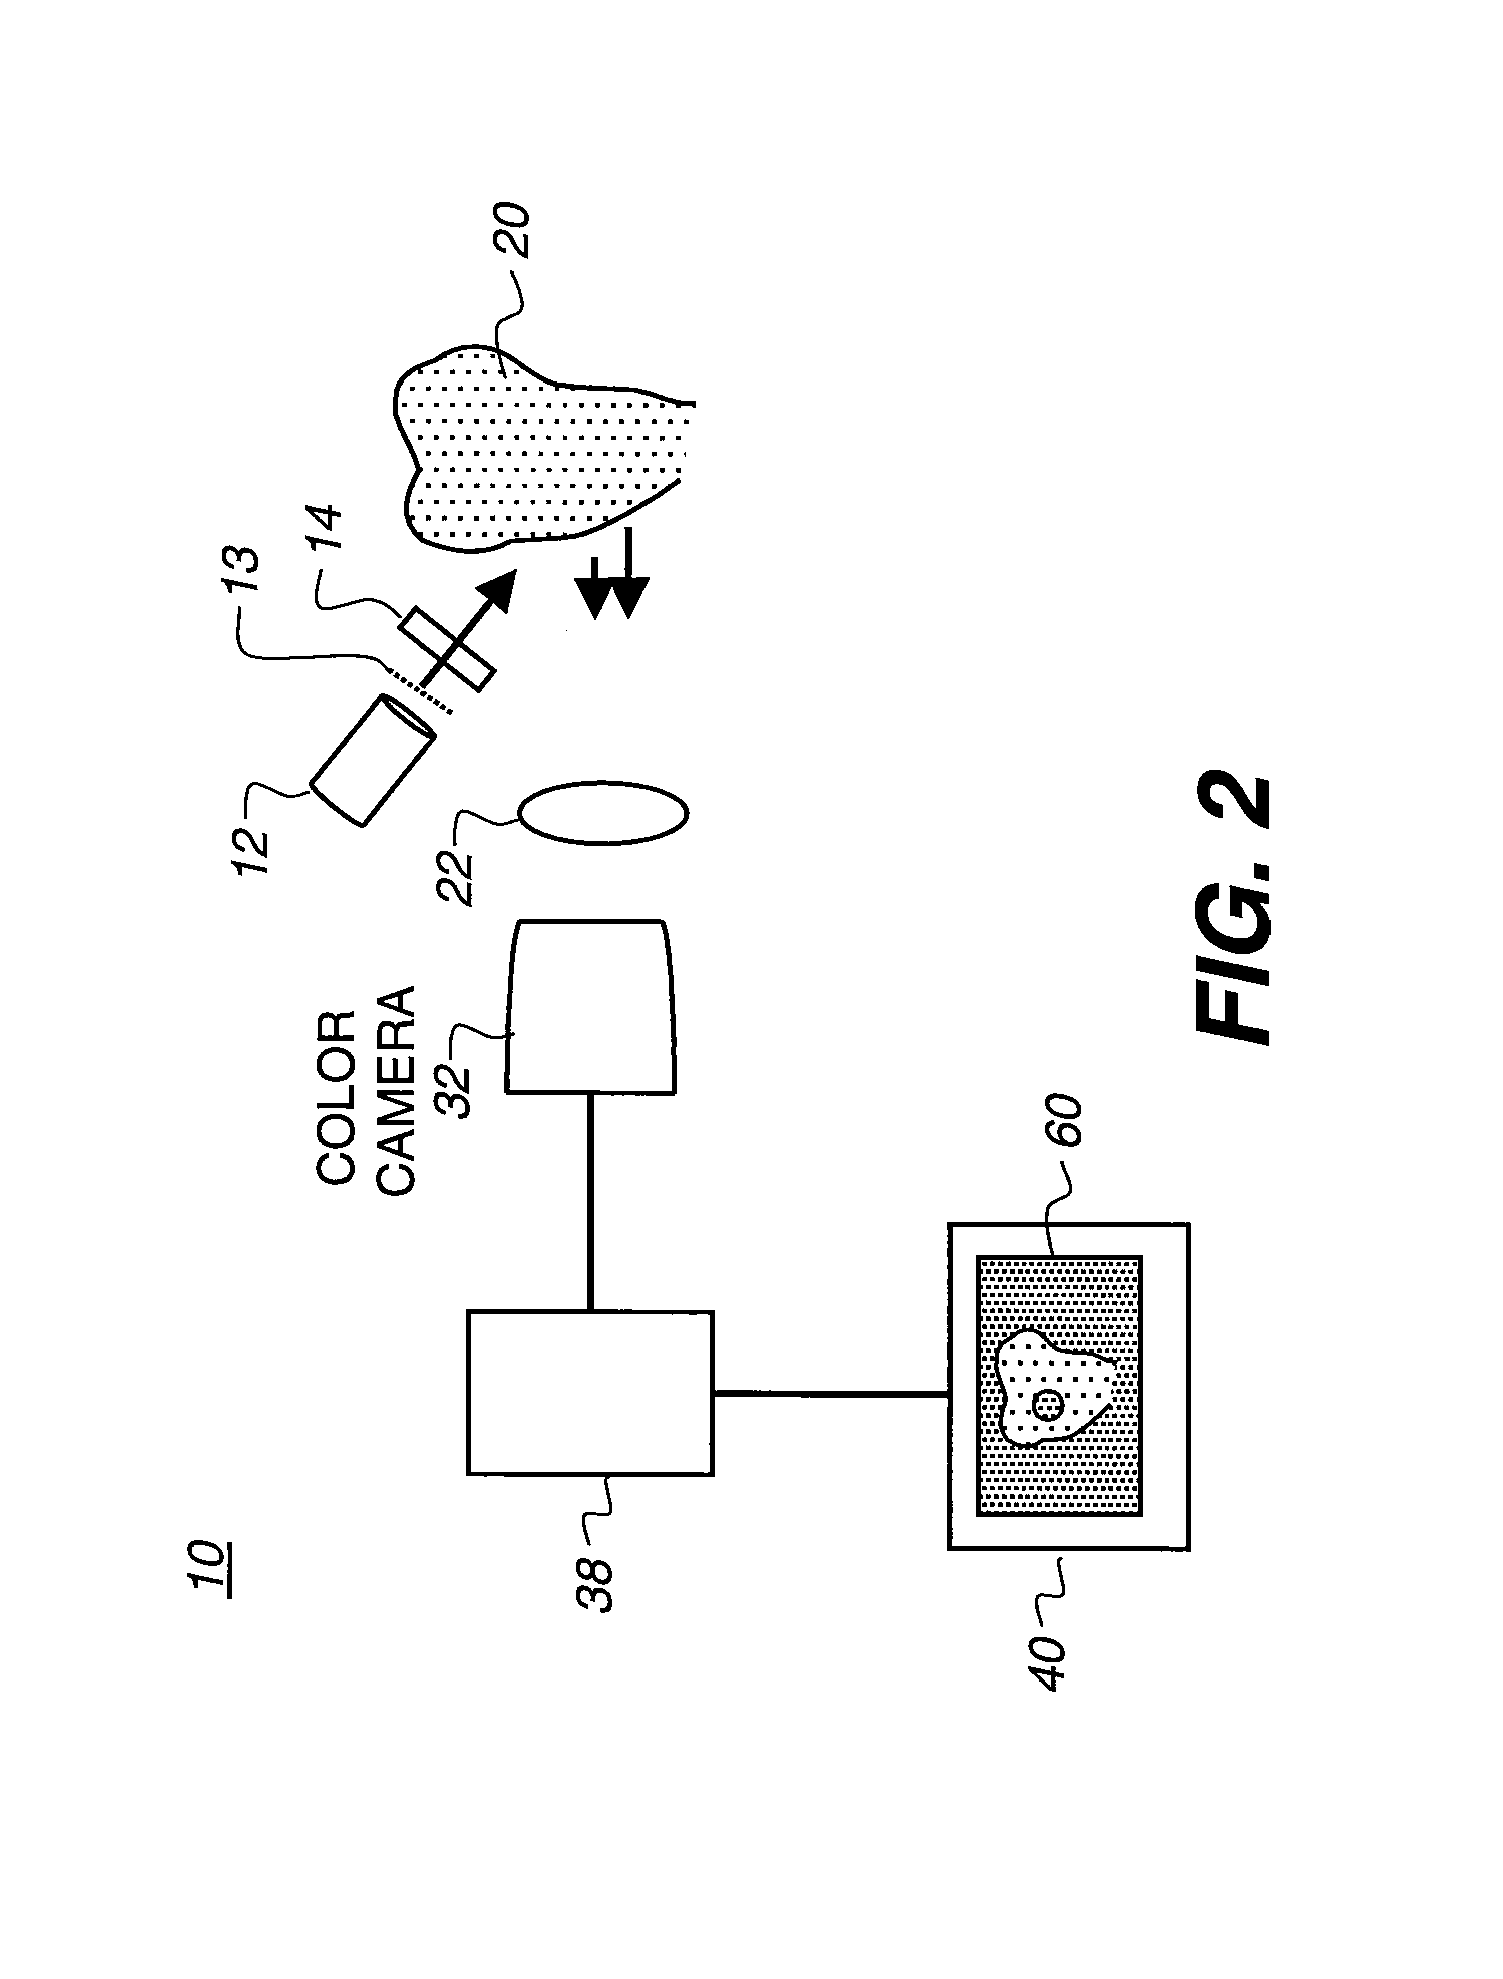 Apparatus for caries detection